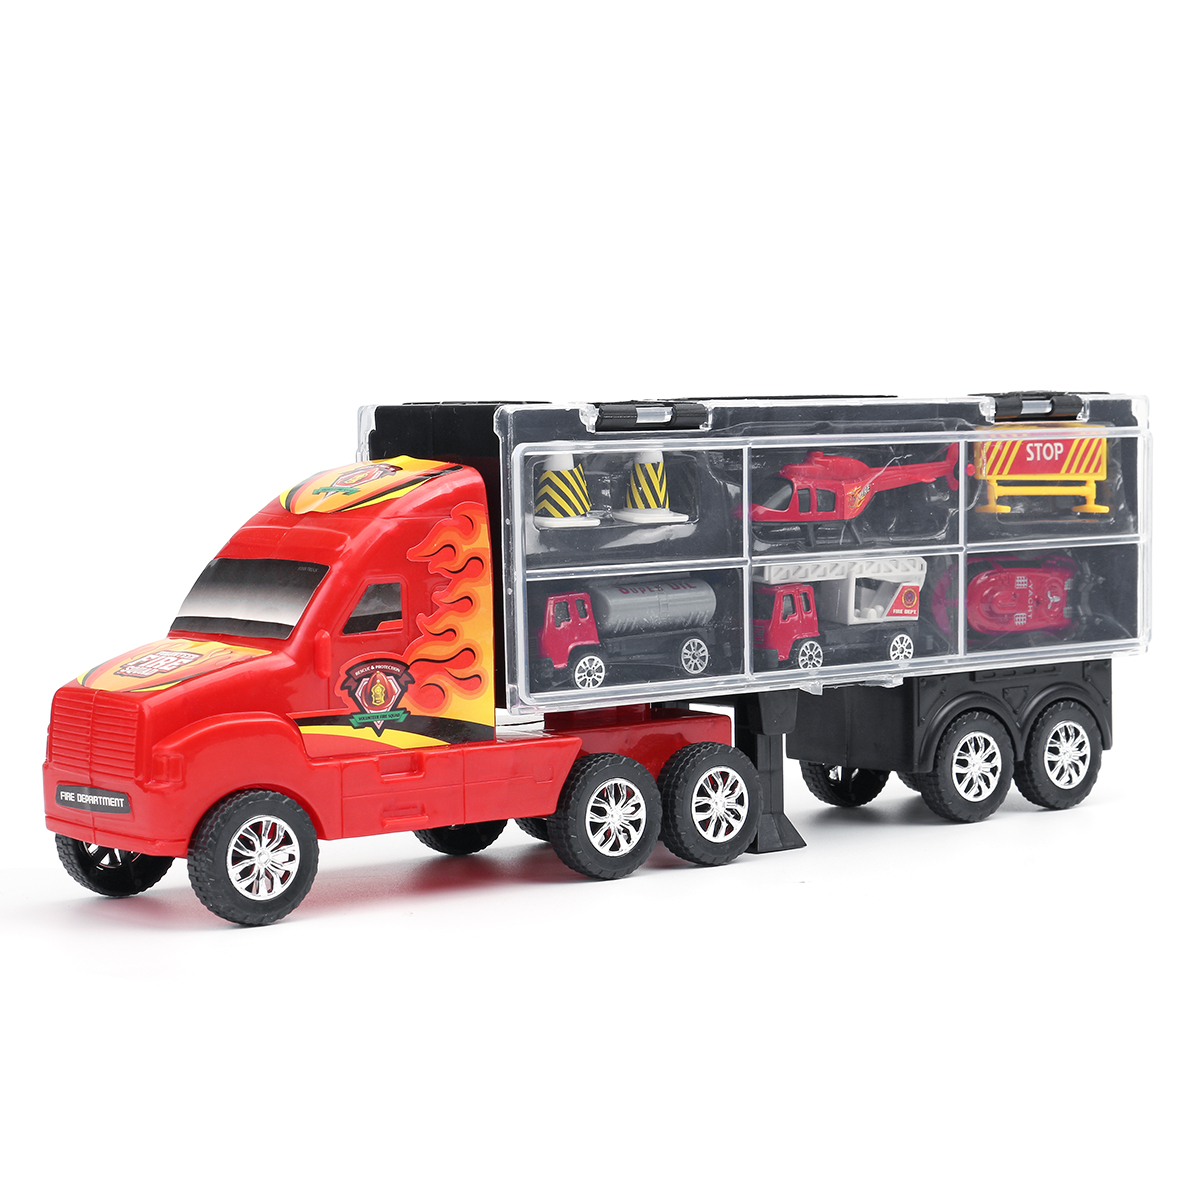 Alloy-Trailer-Container-Car-Storage-Box-Diecast-Car-Model-Set-Toy-for-Childrens-Gift-1635959-5